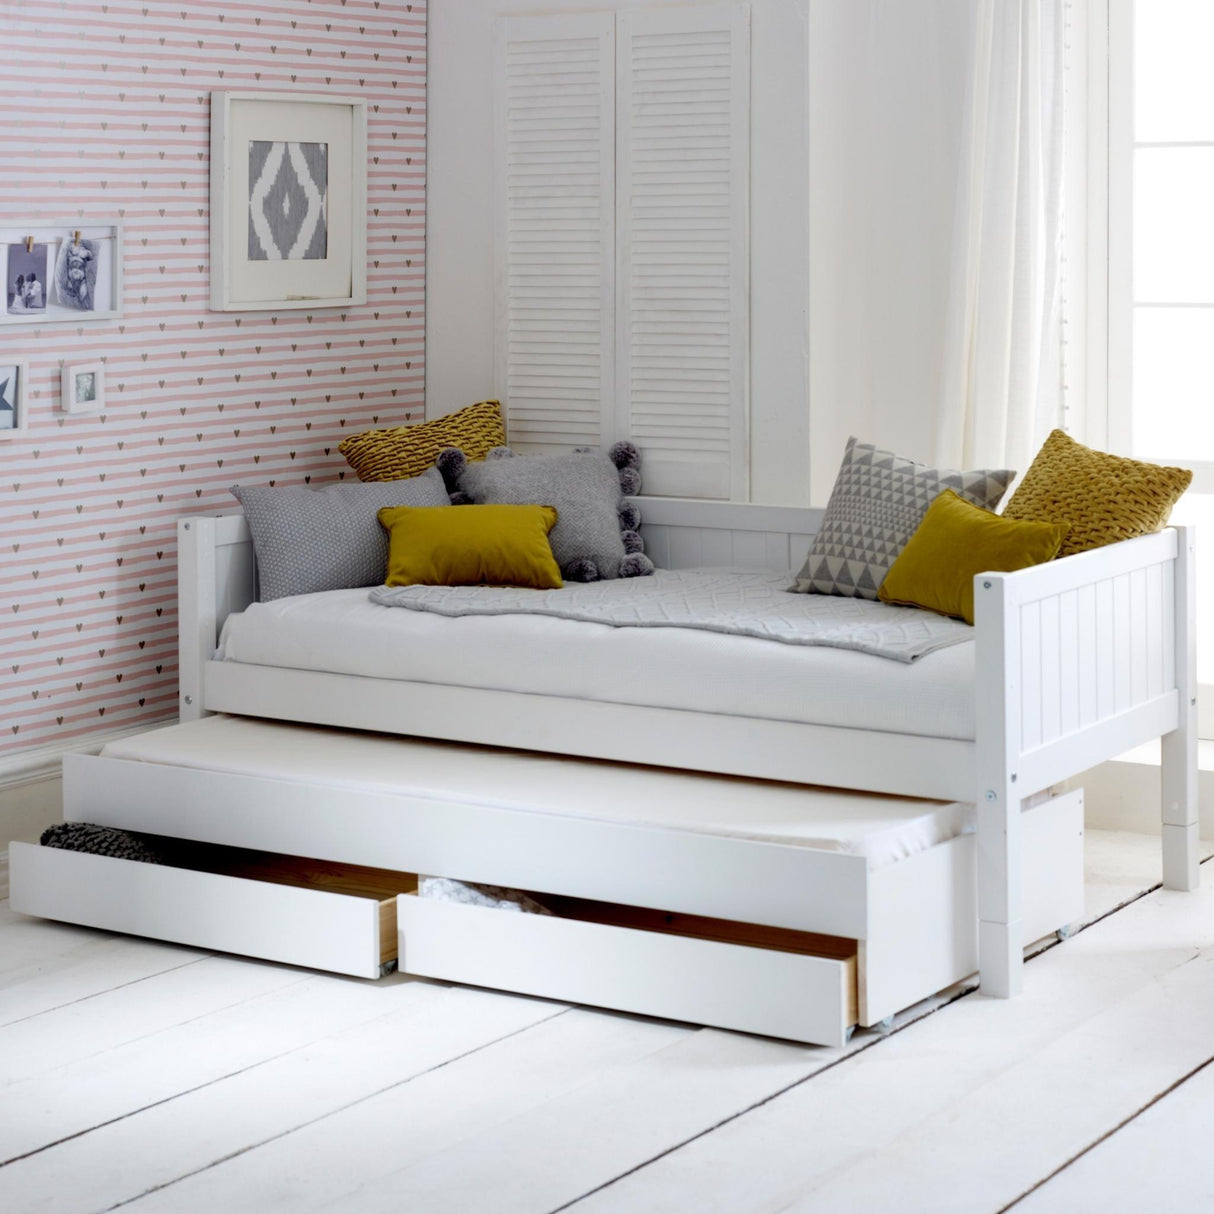 Thuka Nordic Daybed 1 with Grooved Panels - Little Snoozes